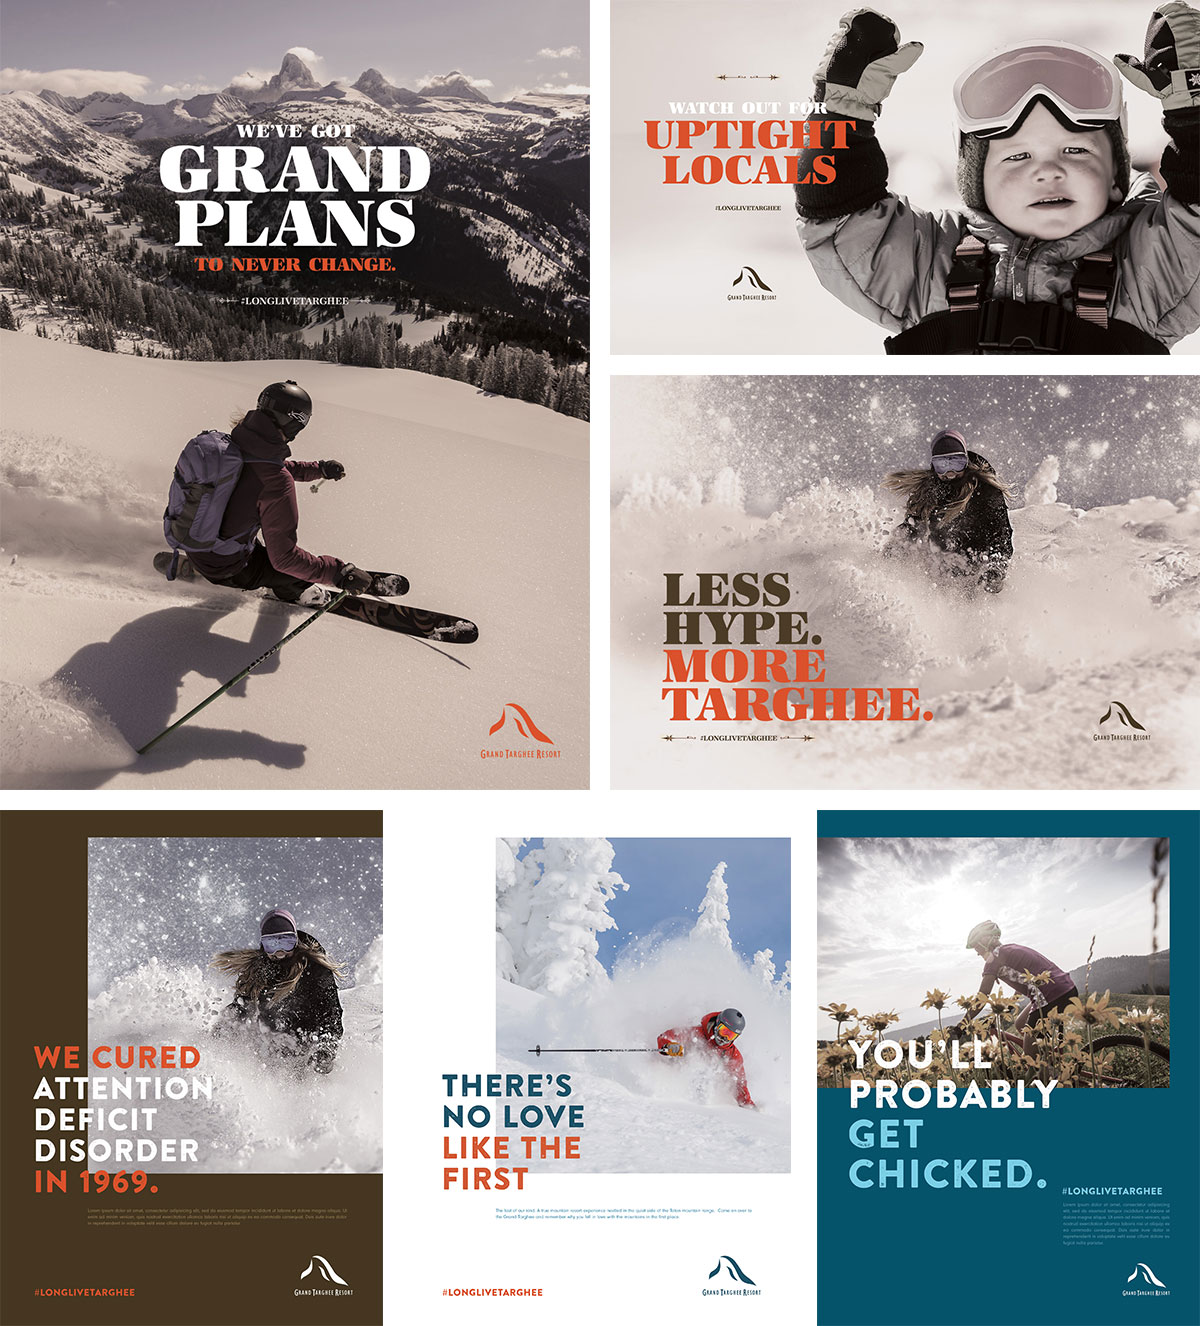 Grand Targhee campaign images